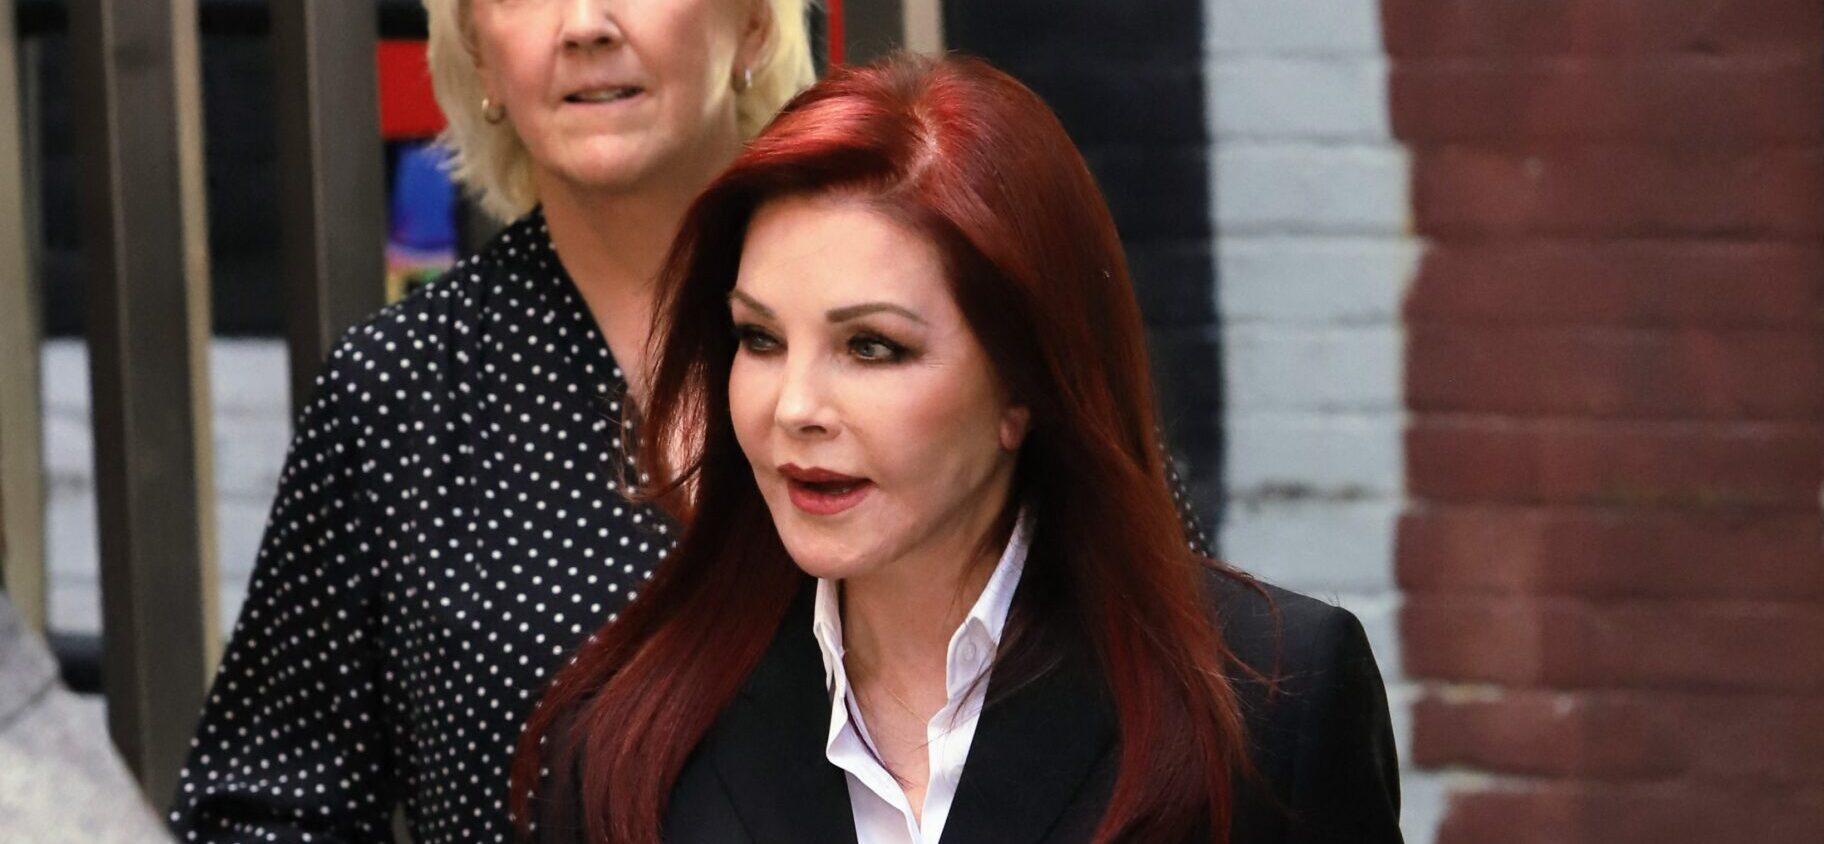 Priscilla Presley gets her prints into Hollywood ahead of the premiere debut of 